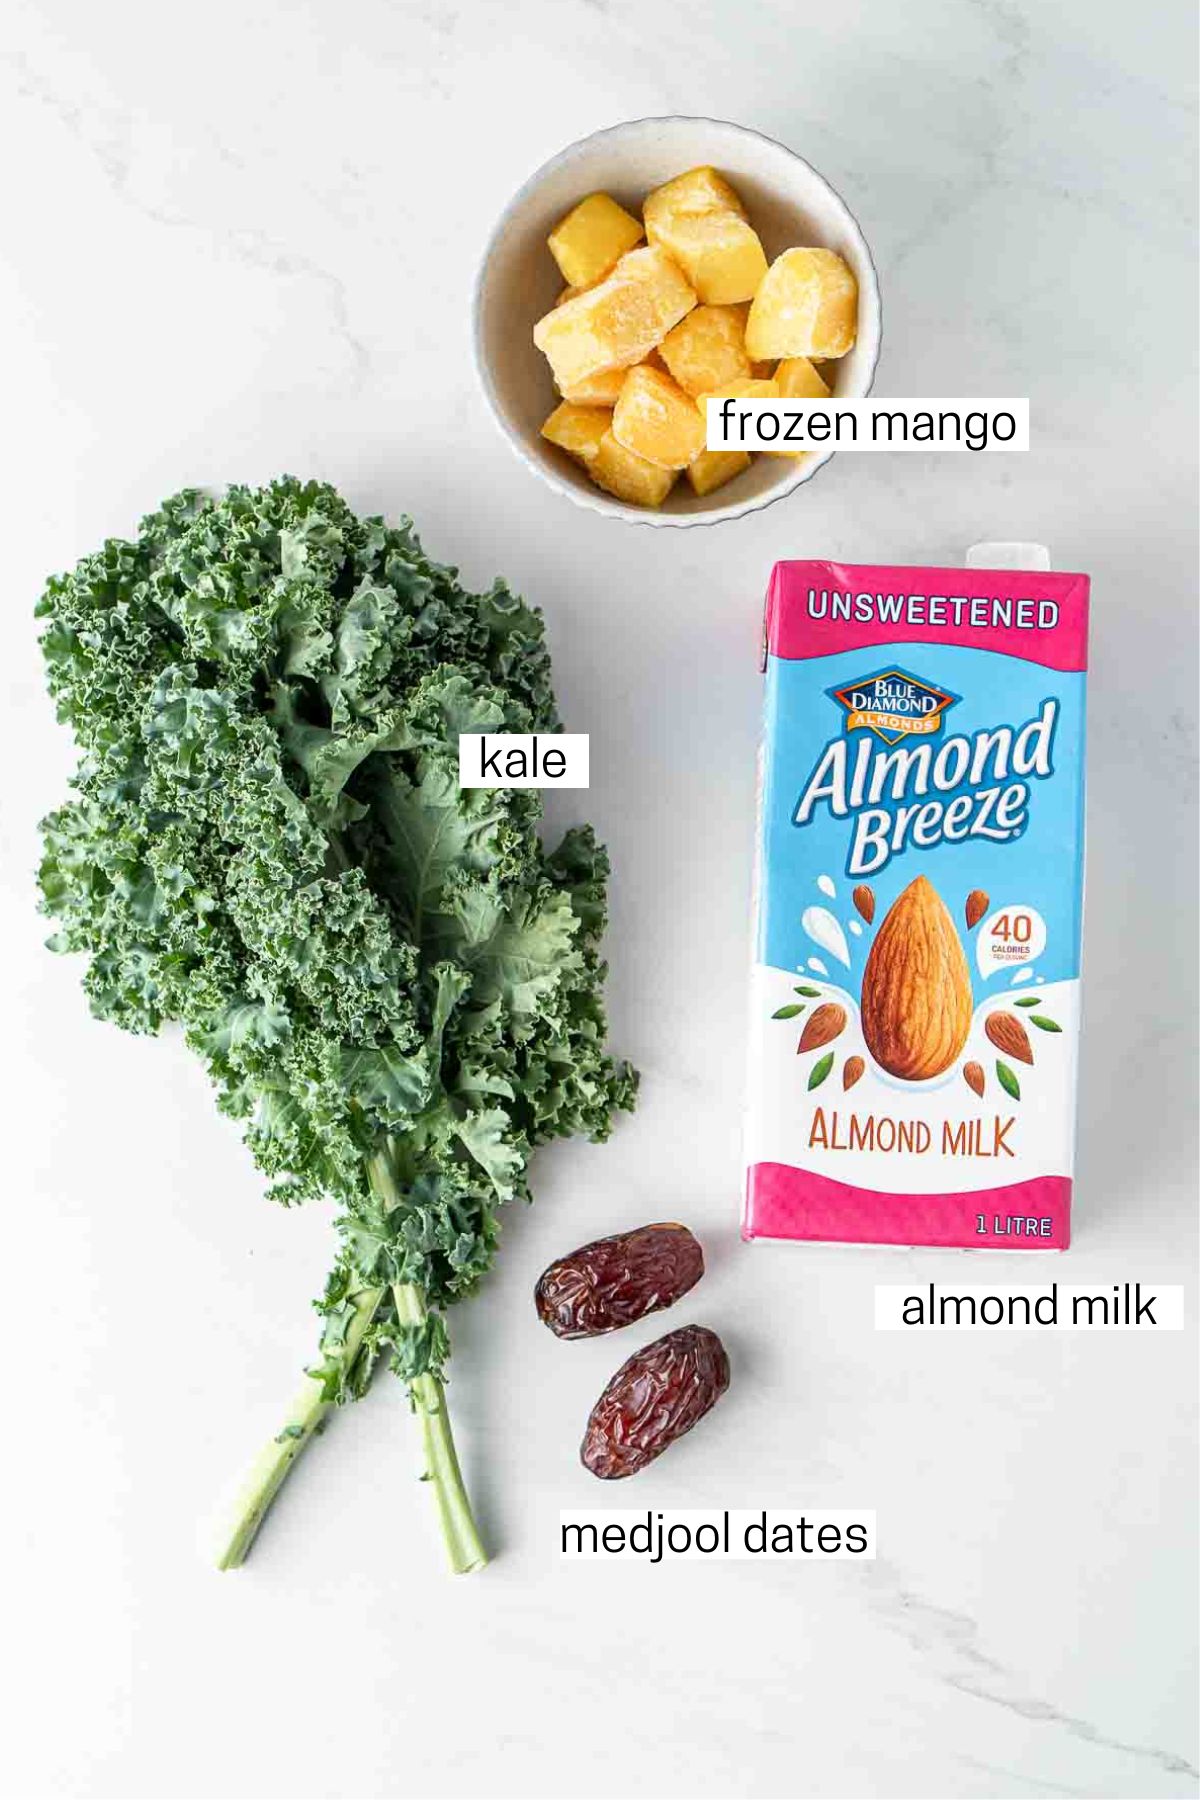 All ingredients for a mango kale smoothie laid out.